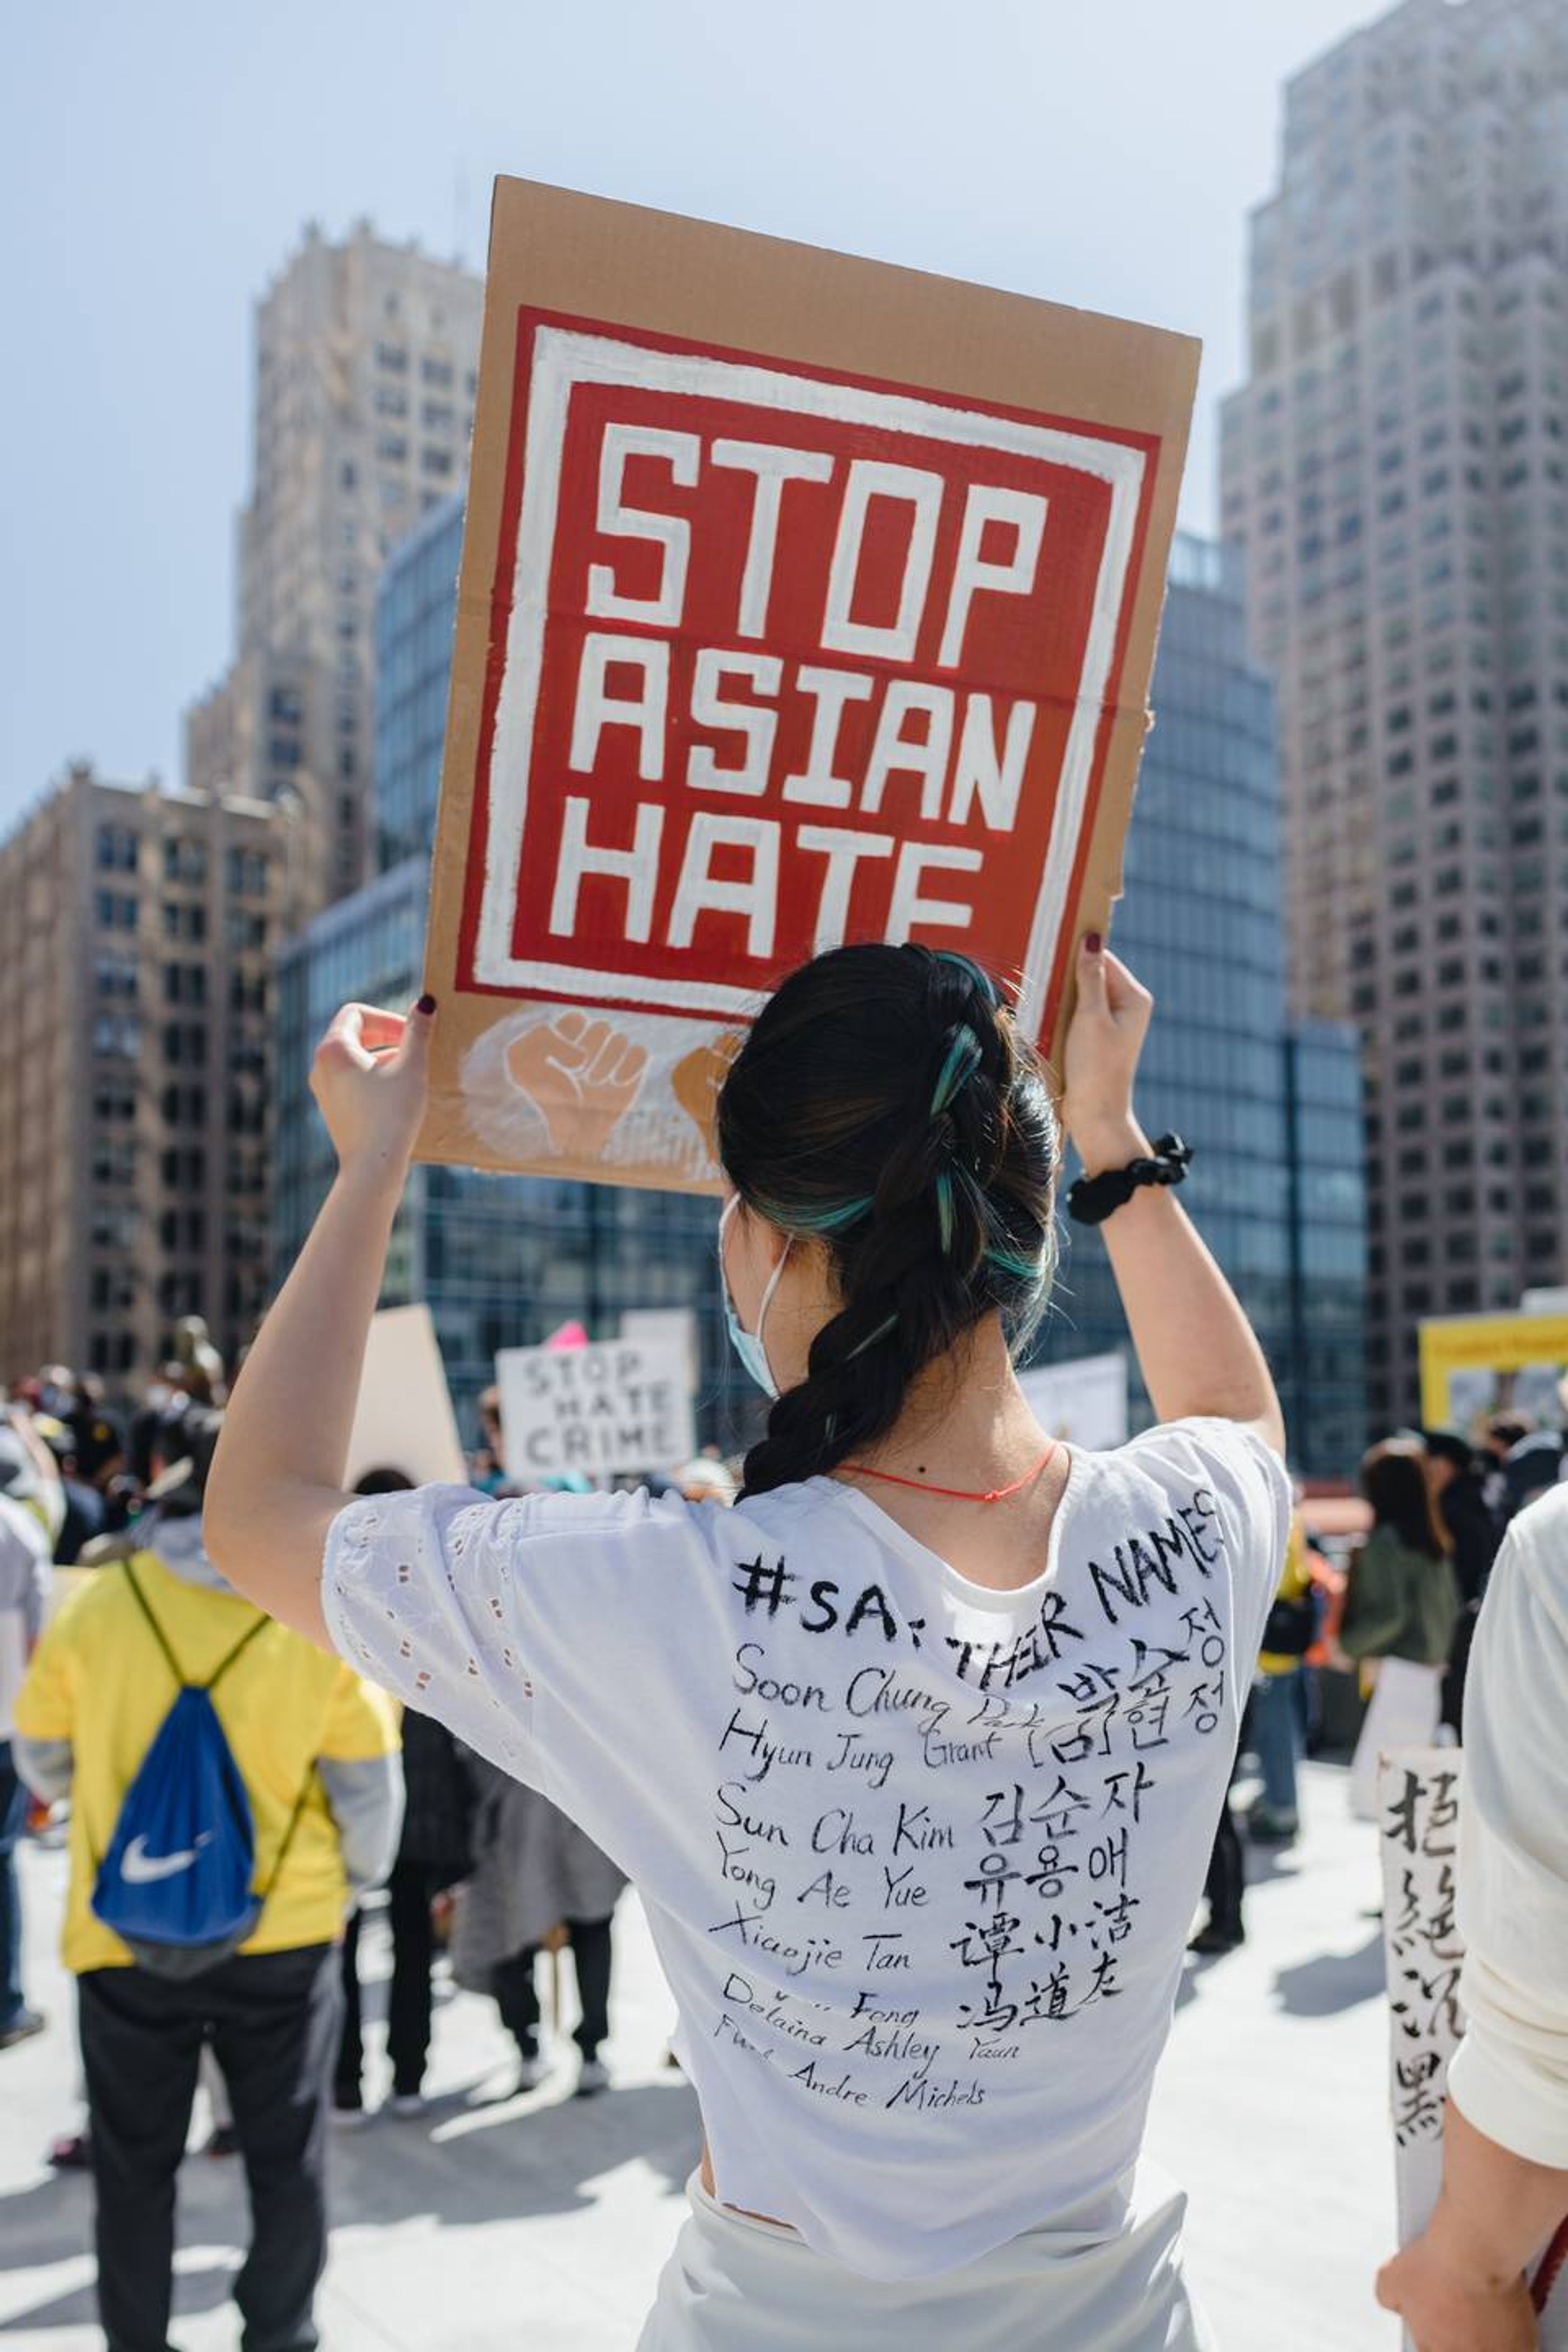 People gather to protest Asian hate. Photo by Jason Leung | Unsplash.